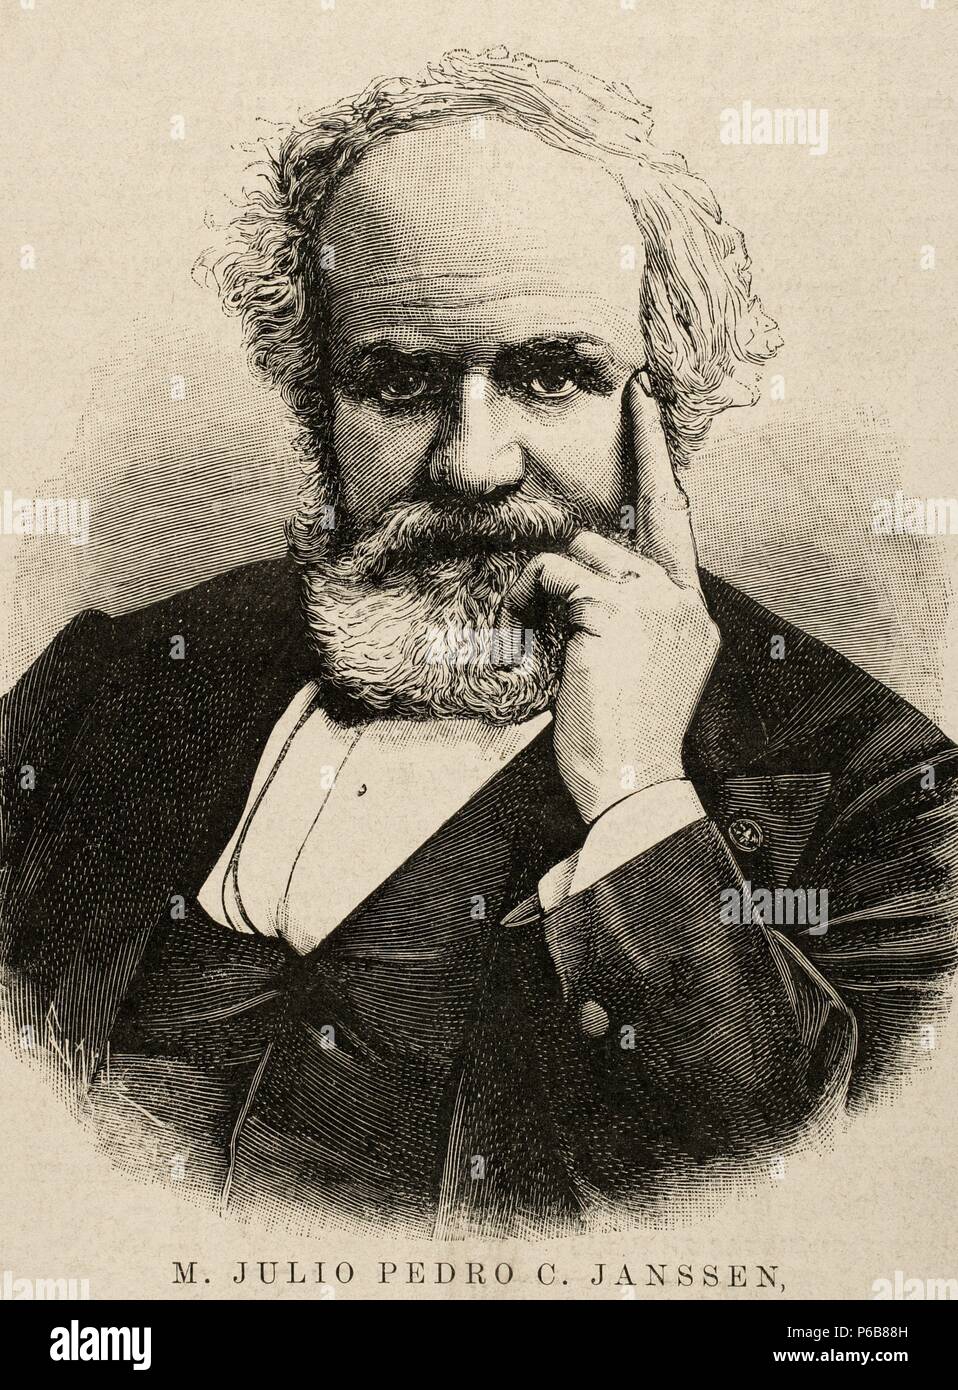 Pierre Janssen (1824-1907). French astronomer. Engraving by Capuz in The Spanish and American Illustration, 1892. Stock Photo